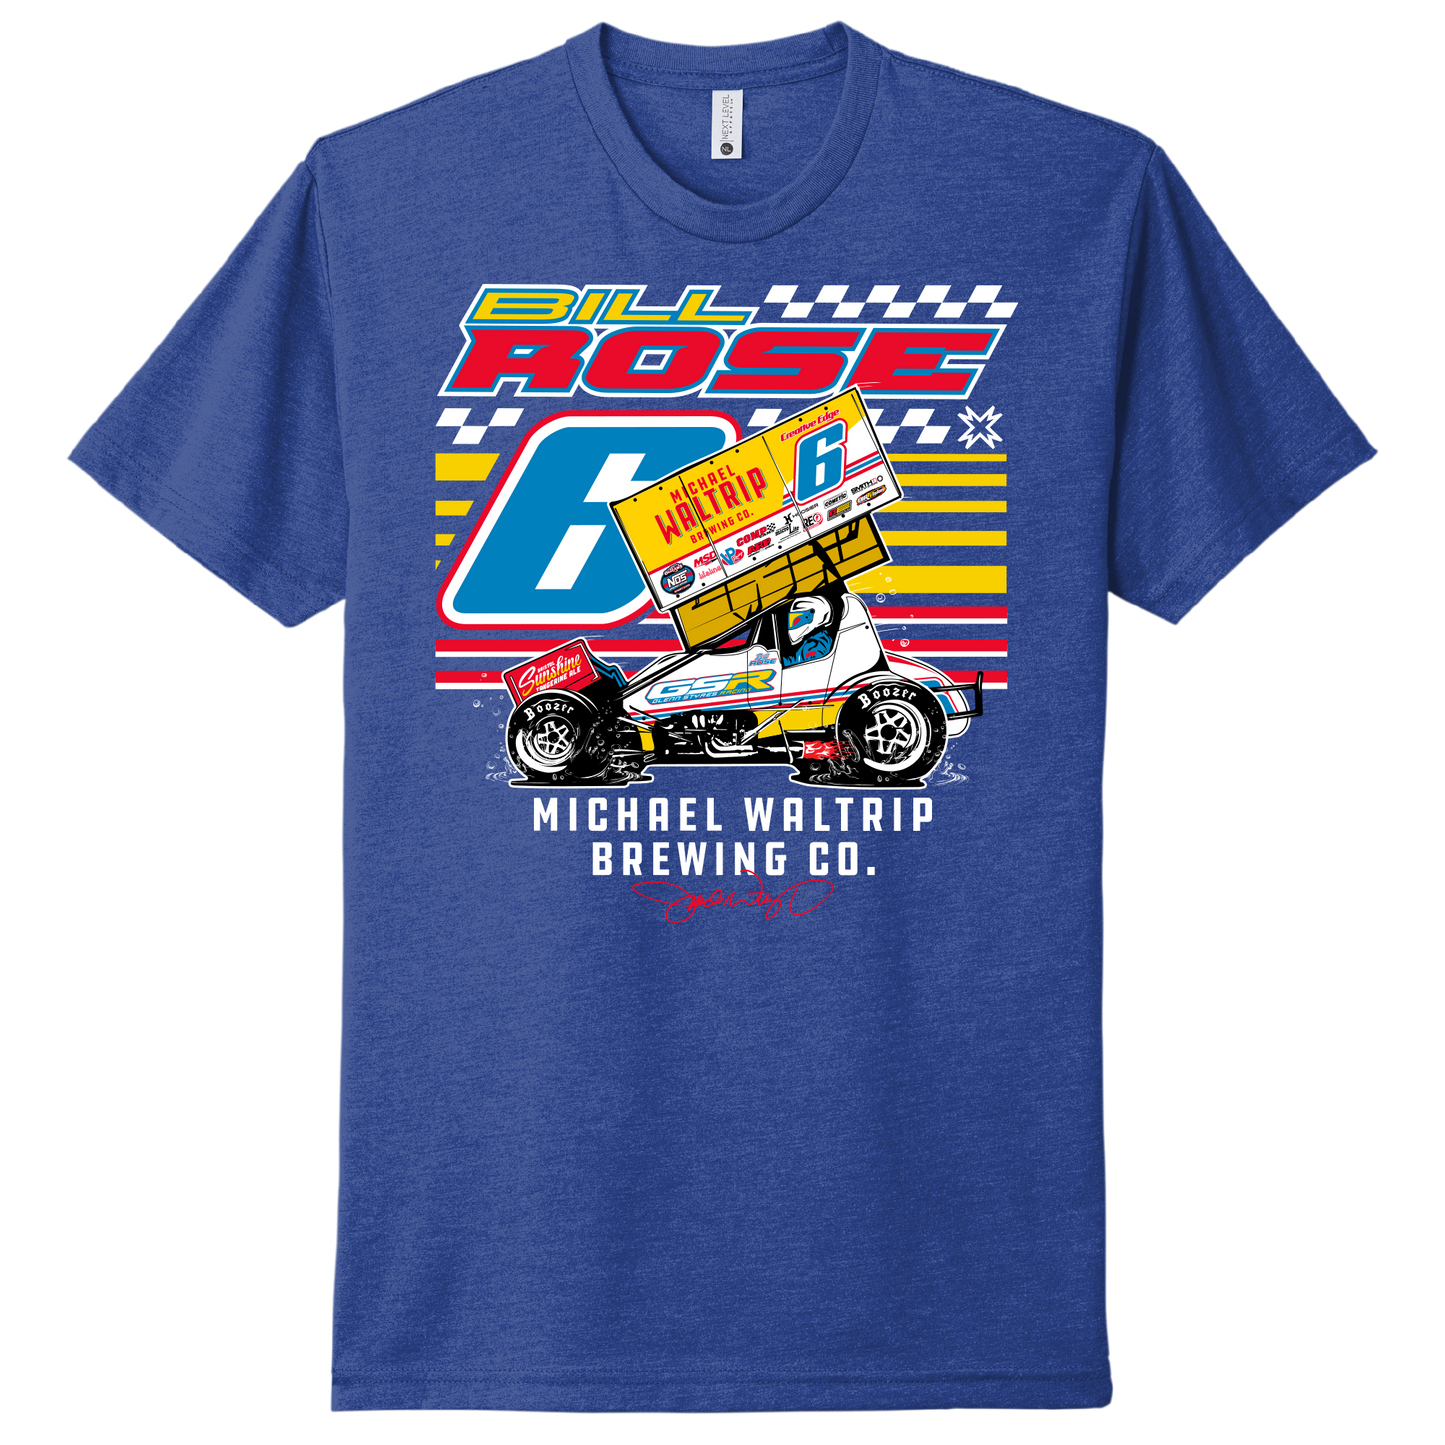 MWB x Bill Rose World of Outlaws Tee